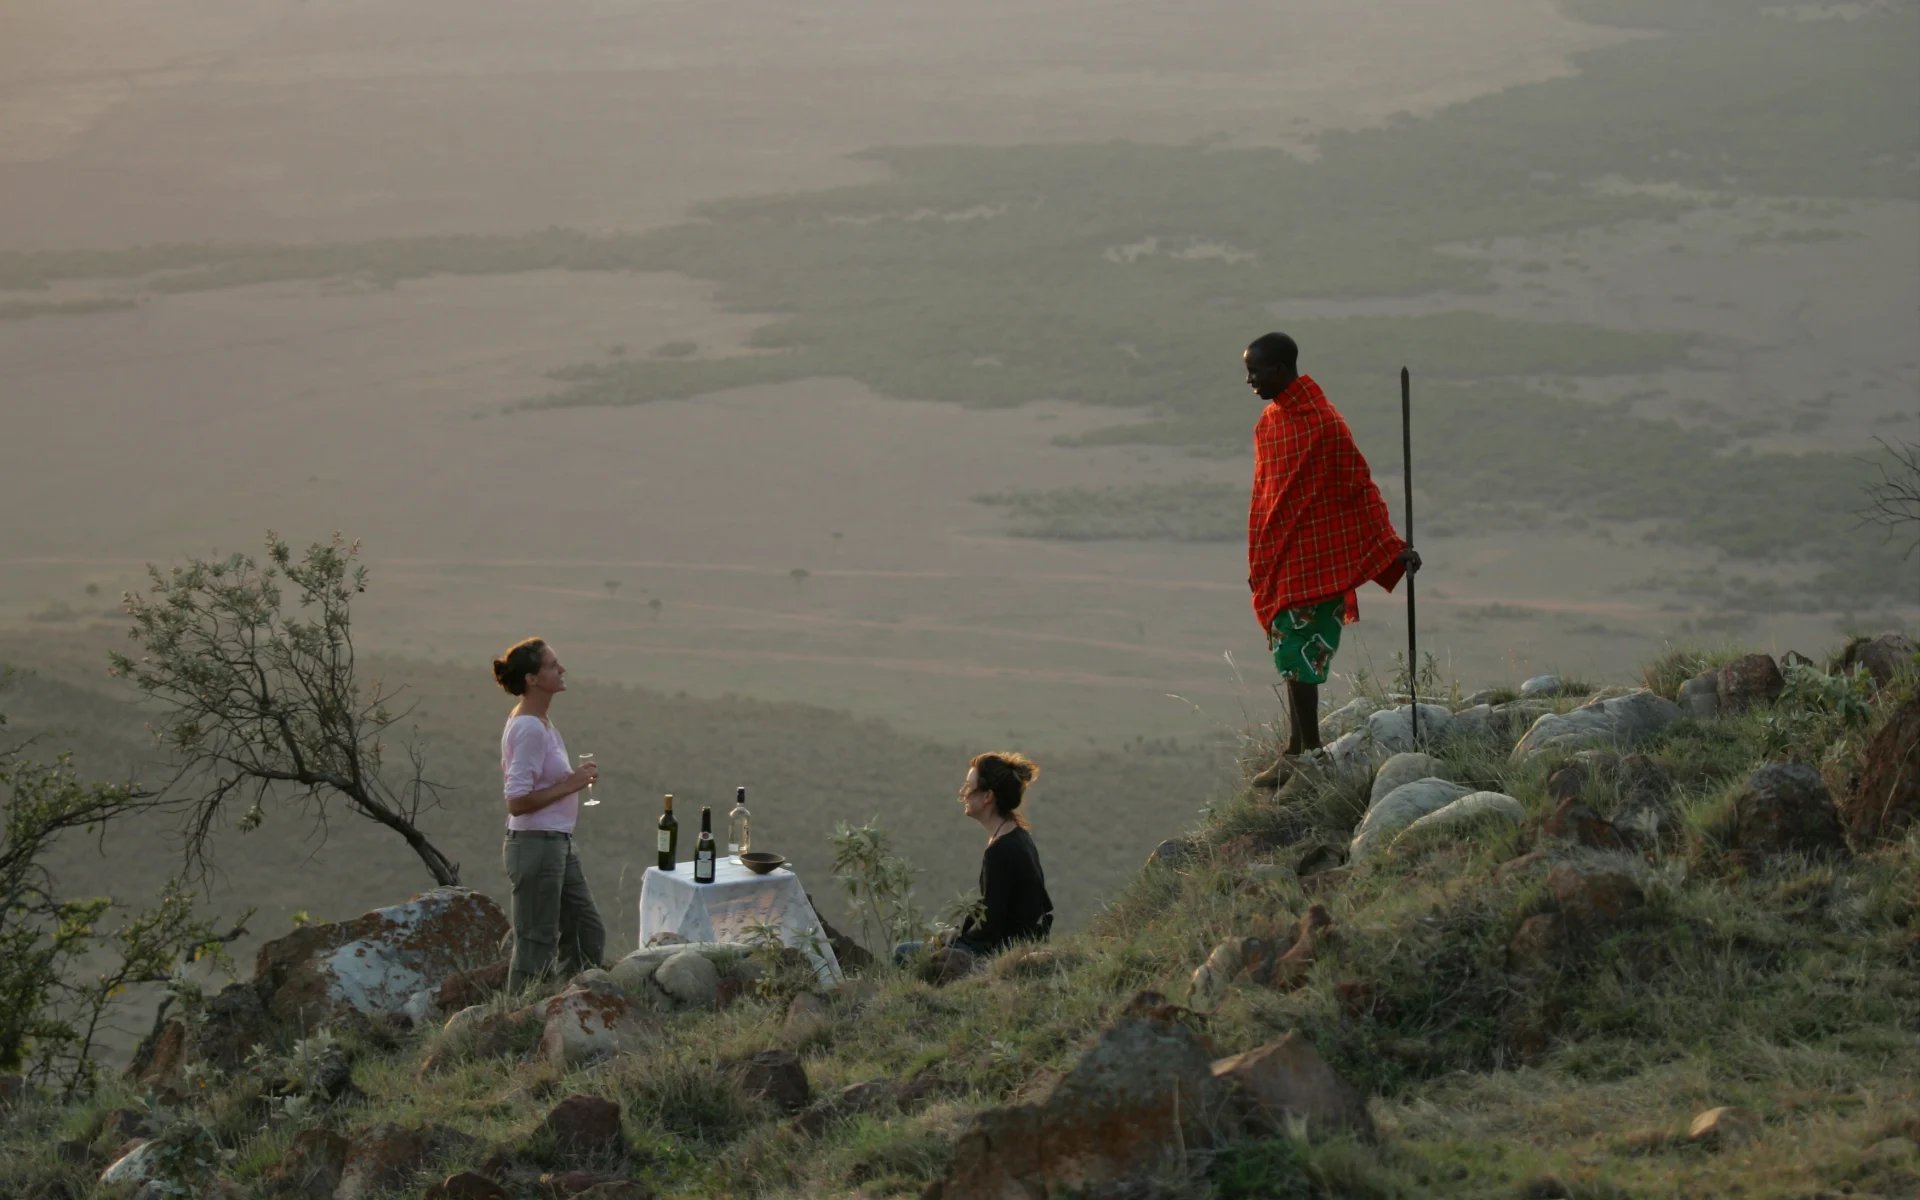 A local Maasai man speaks to a couple as they enjoy a private dining experience on a cliffside in the Masai Mara.